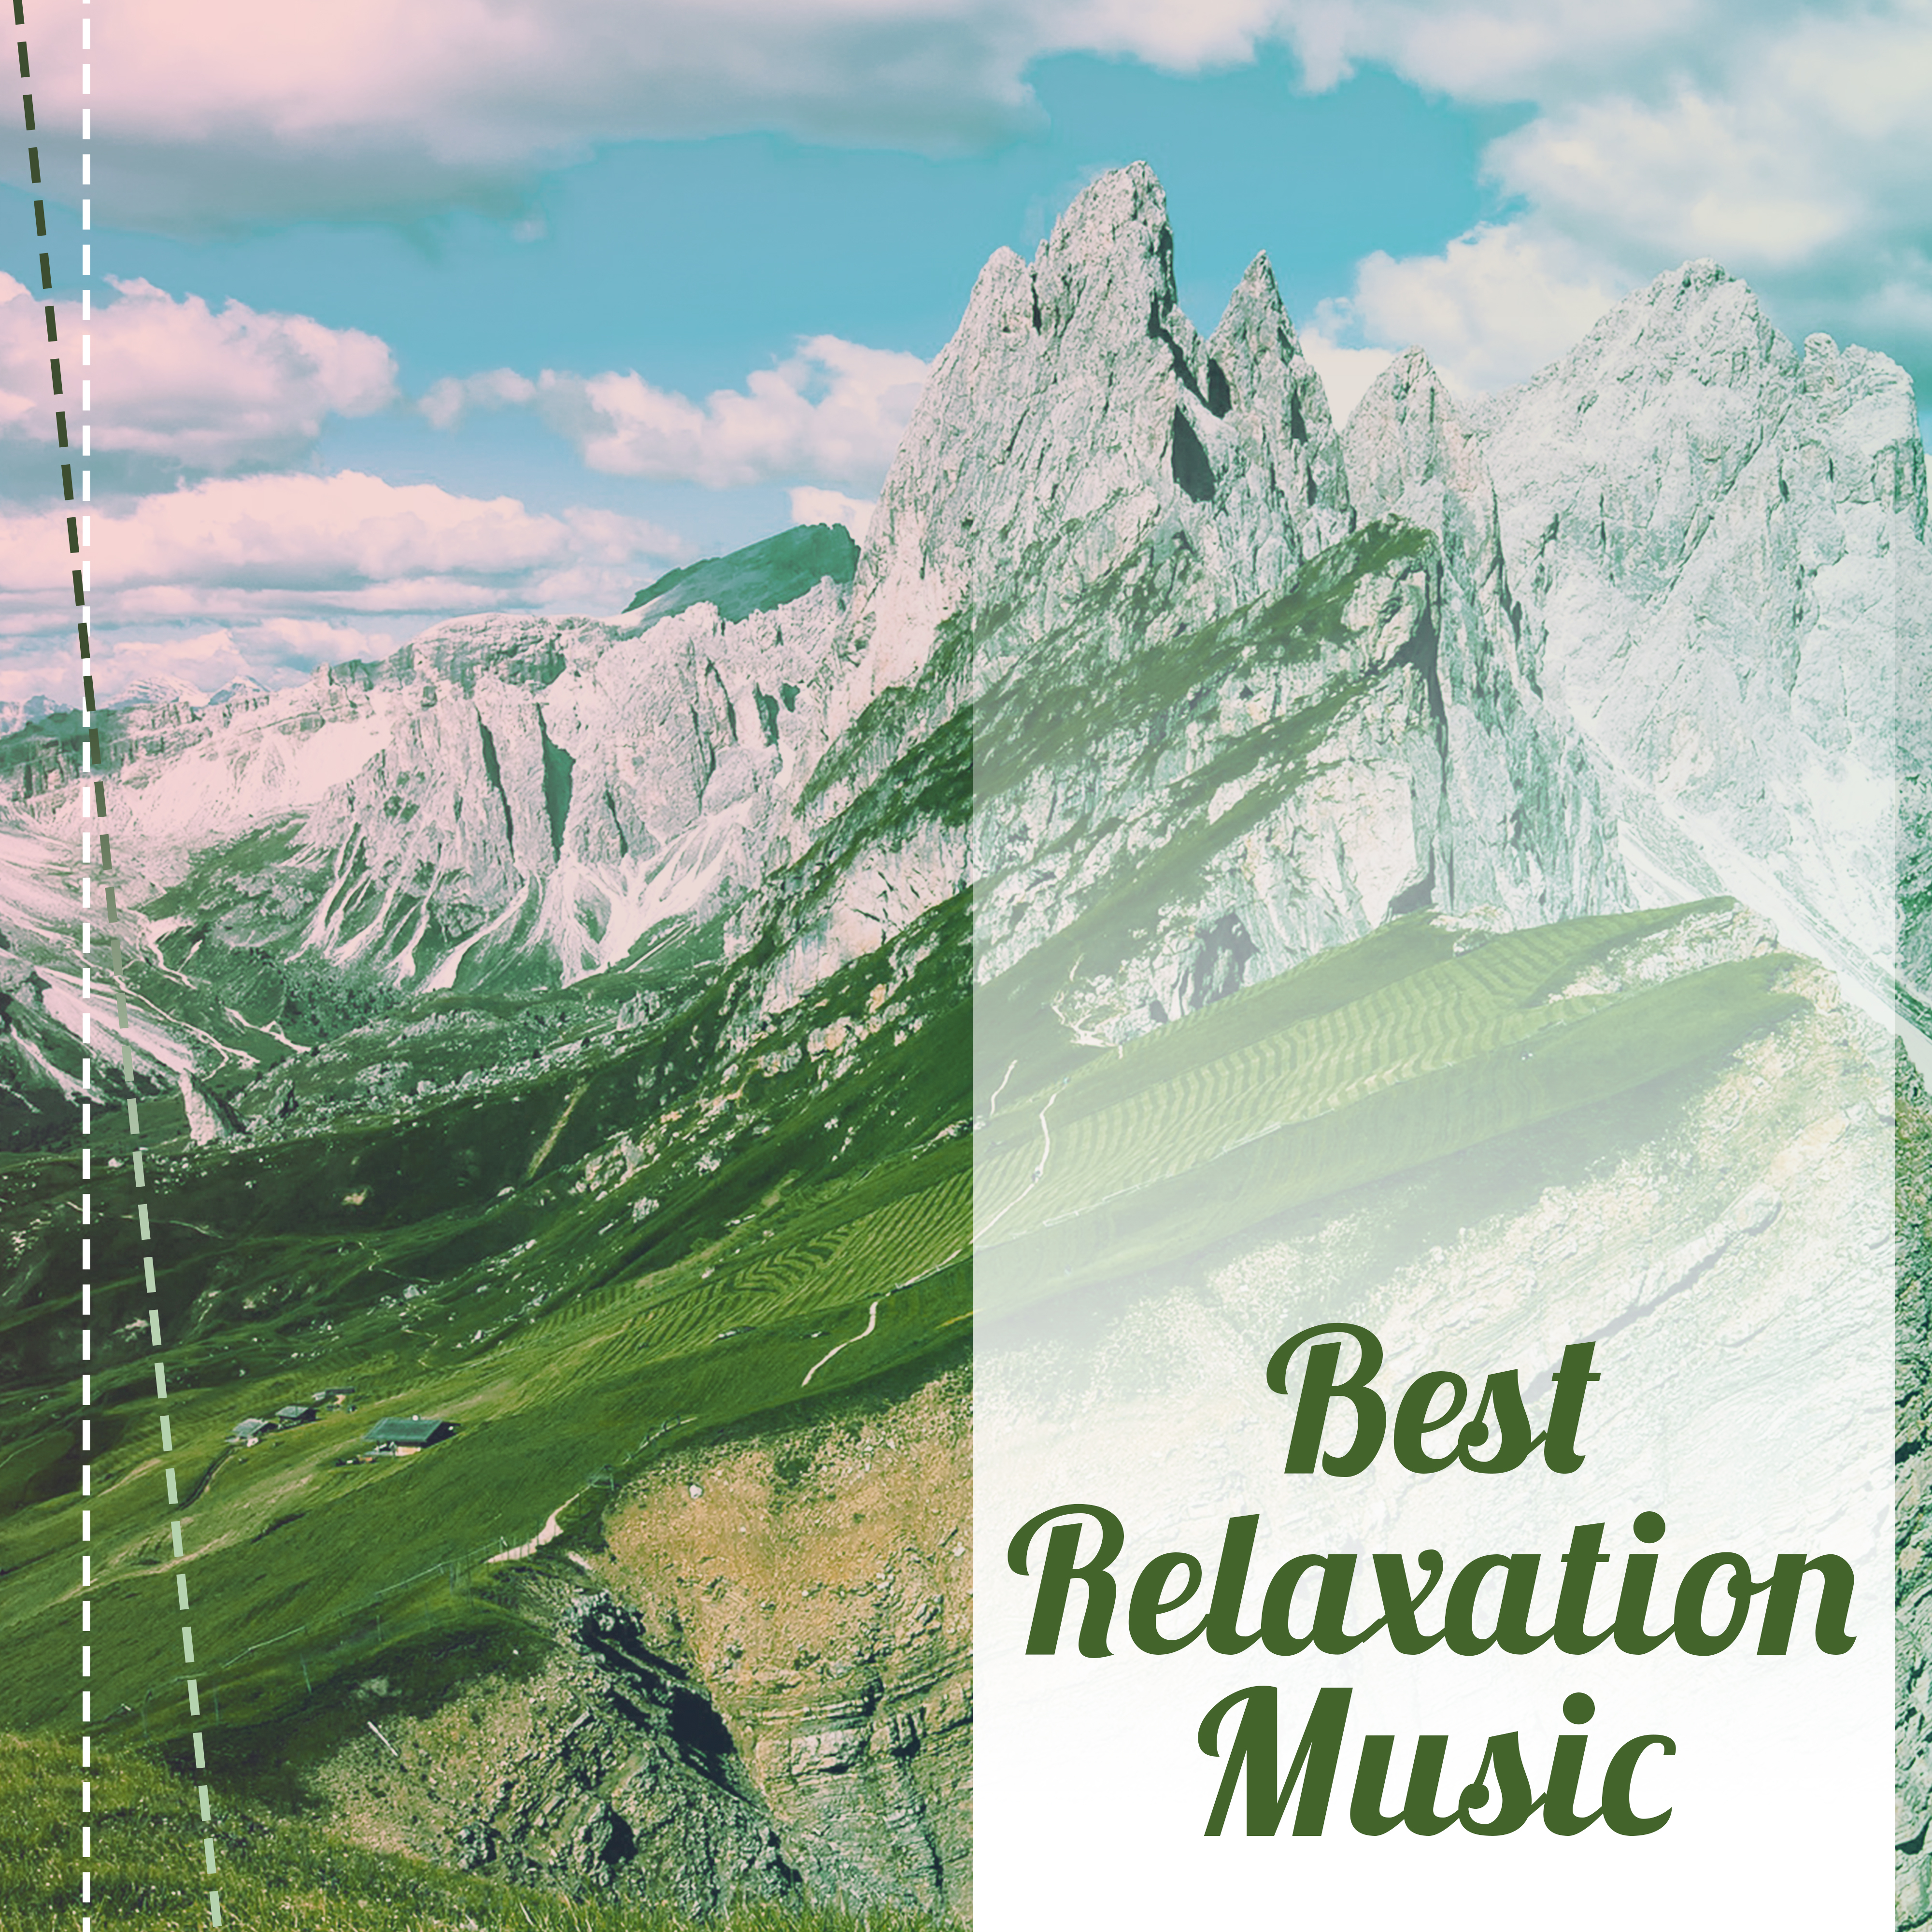 Best Relaxation Music  Peaceful Nature Sounds to Rest, Relief, Zen, Soothing Water, Melodies to Calm Down, Deep Sleep